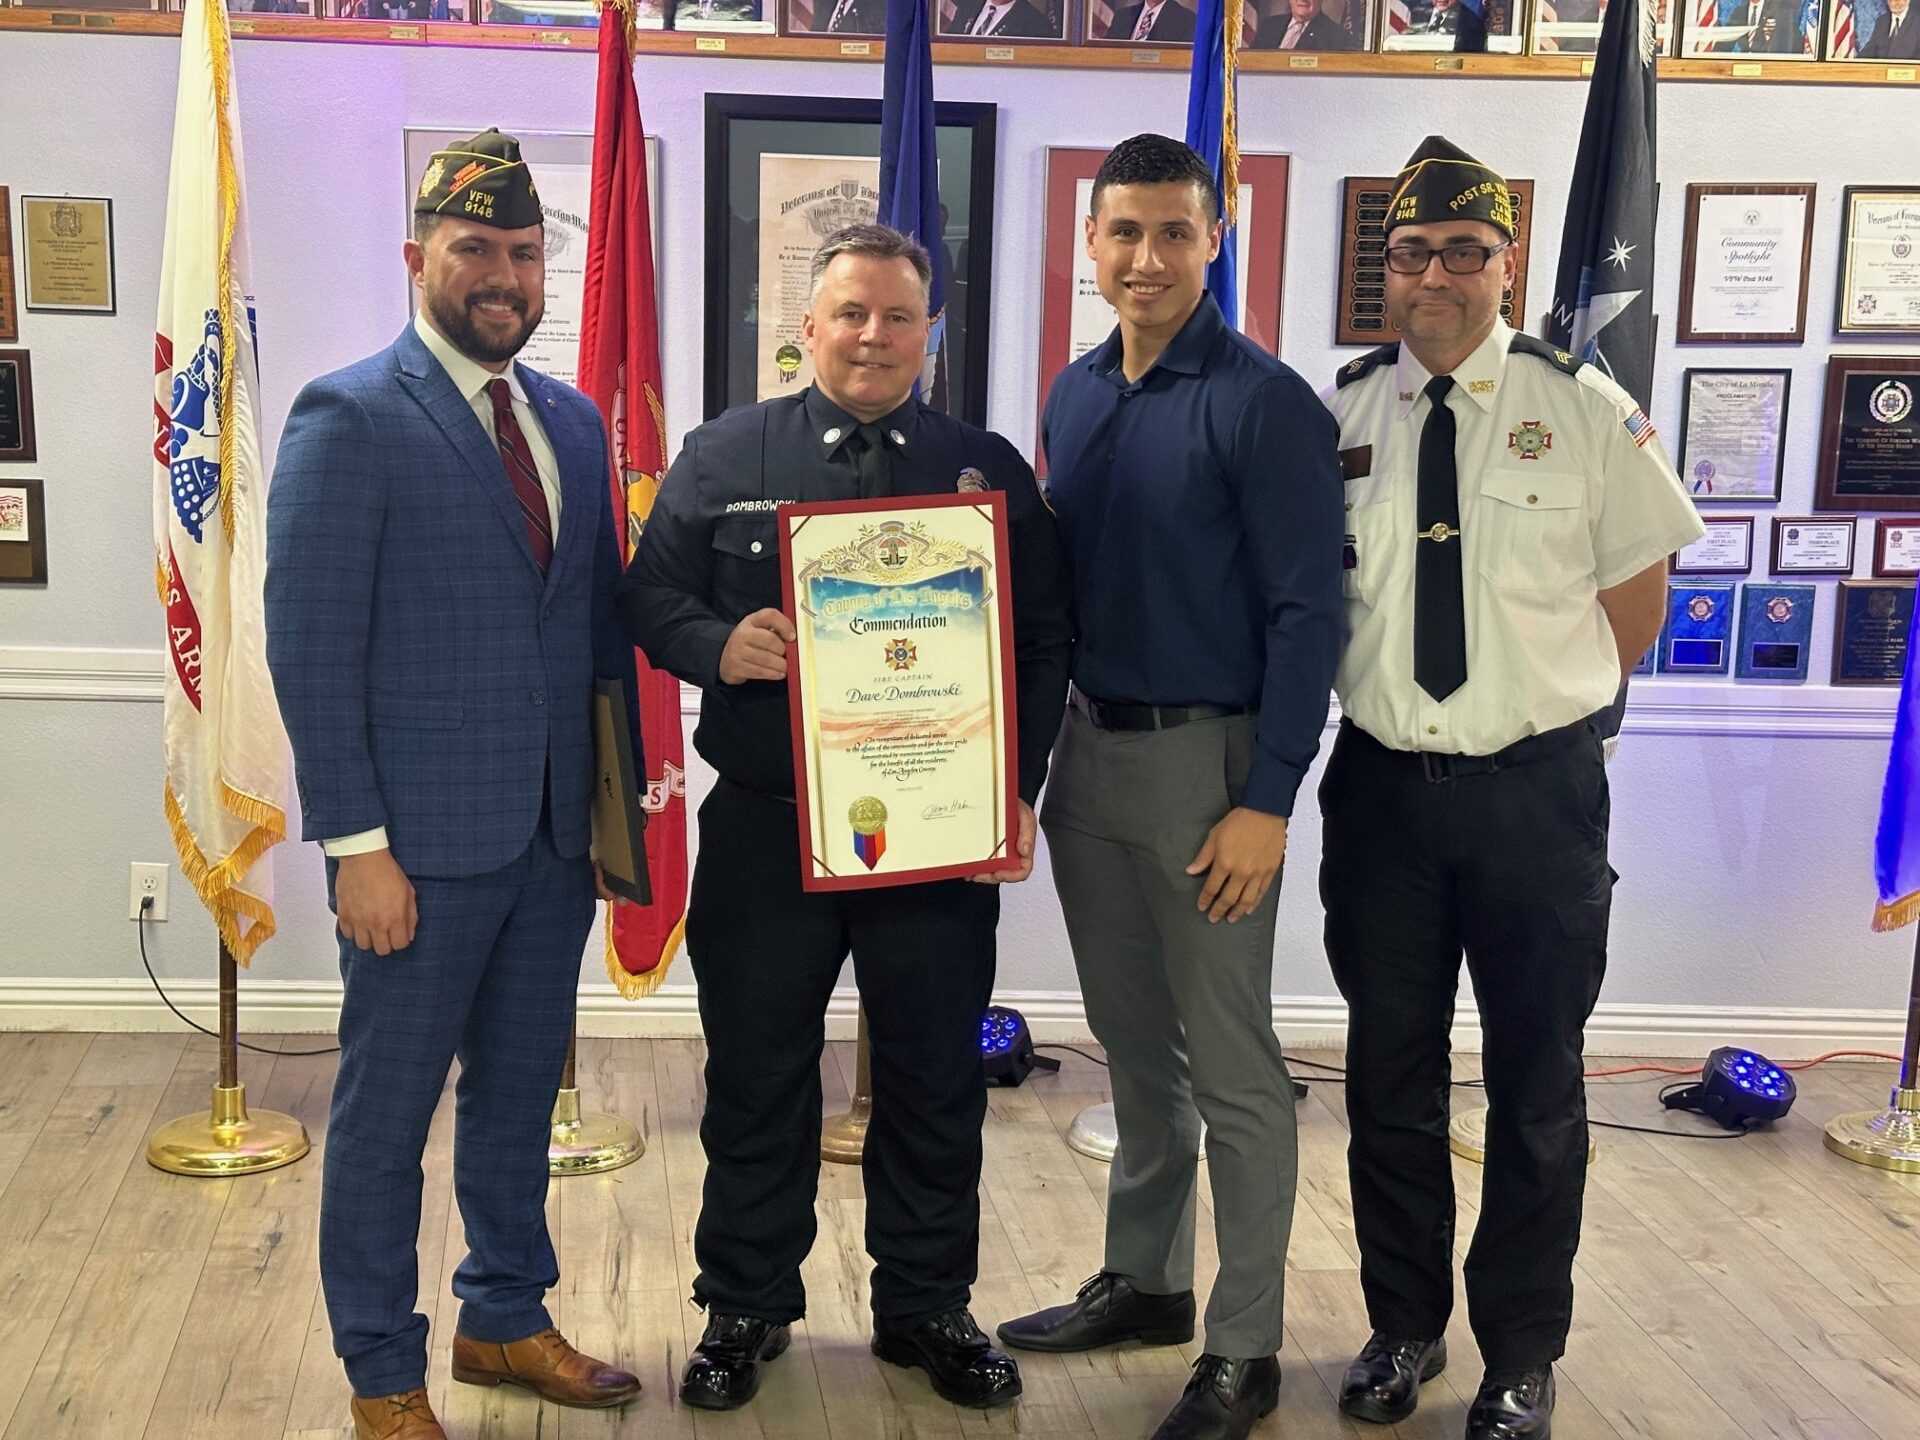 On Thursday, February 29, 2024, County of Los Angeles Fire Department (LACoFD) Fire Captain David Dombrowski was honored as Firefighter of the Year by the Veterans of Foreign Wars (VFW) Post #9148 in the City of La Mirada.